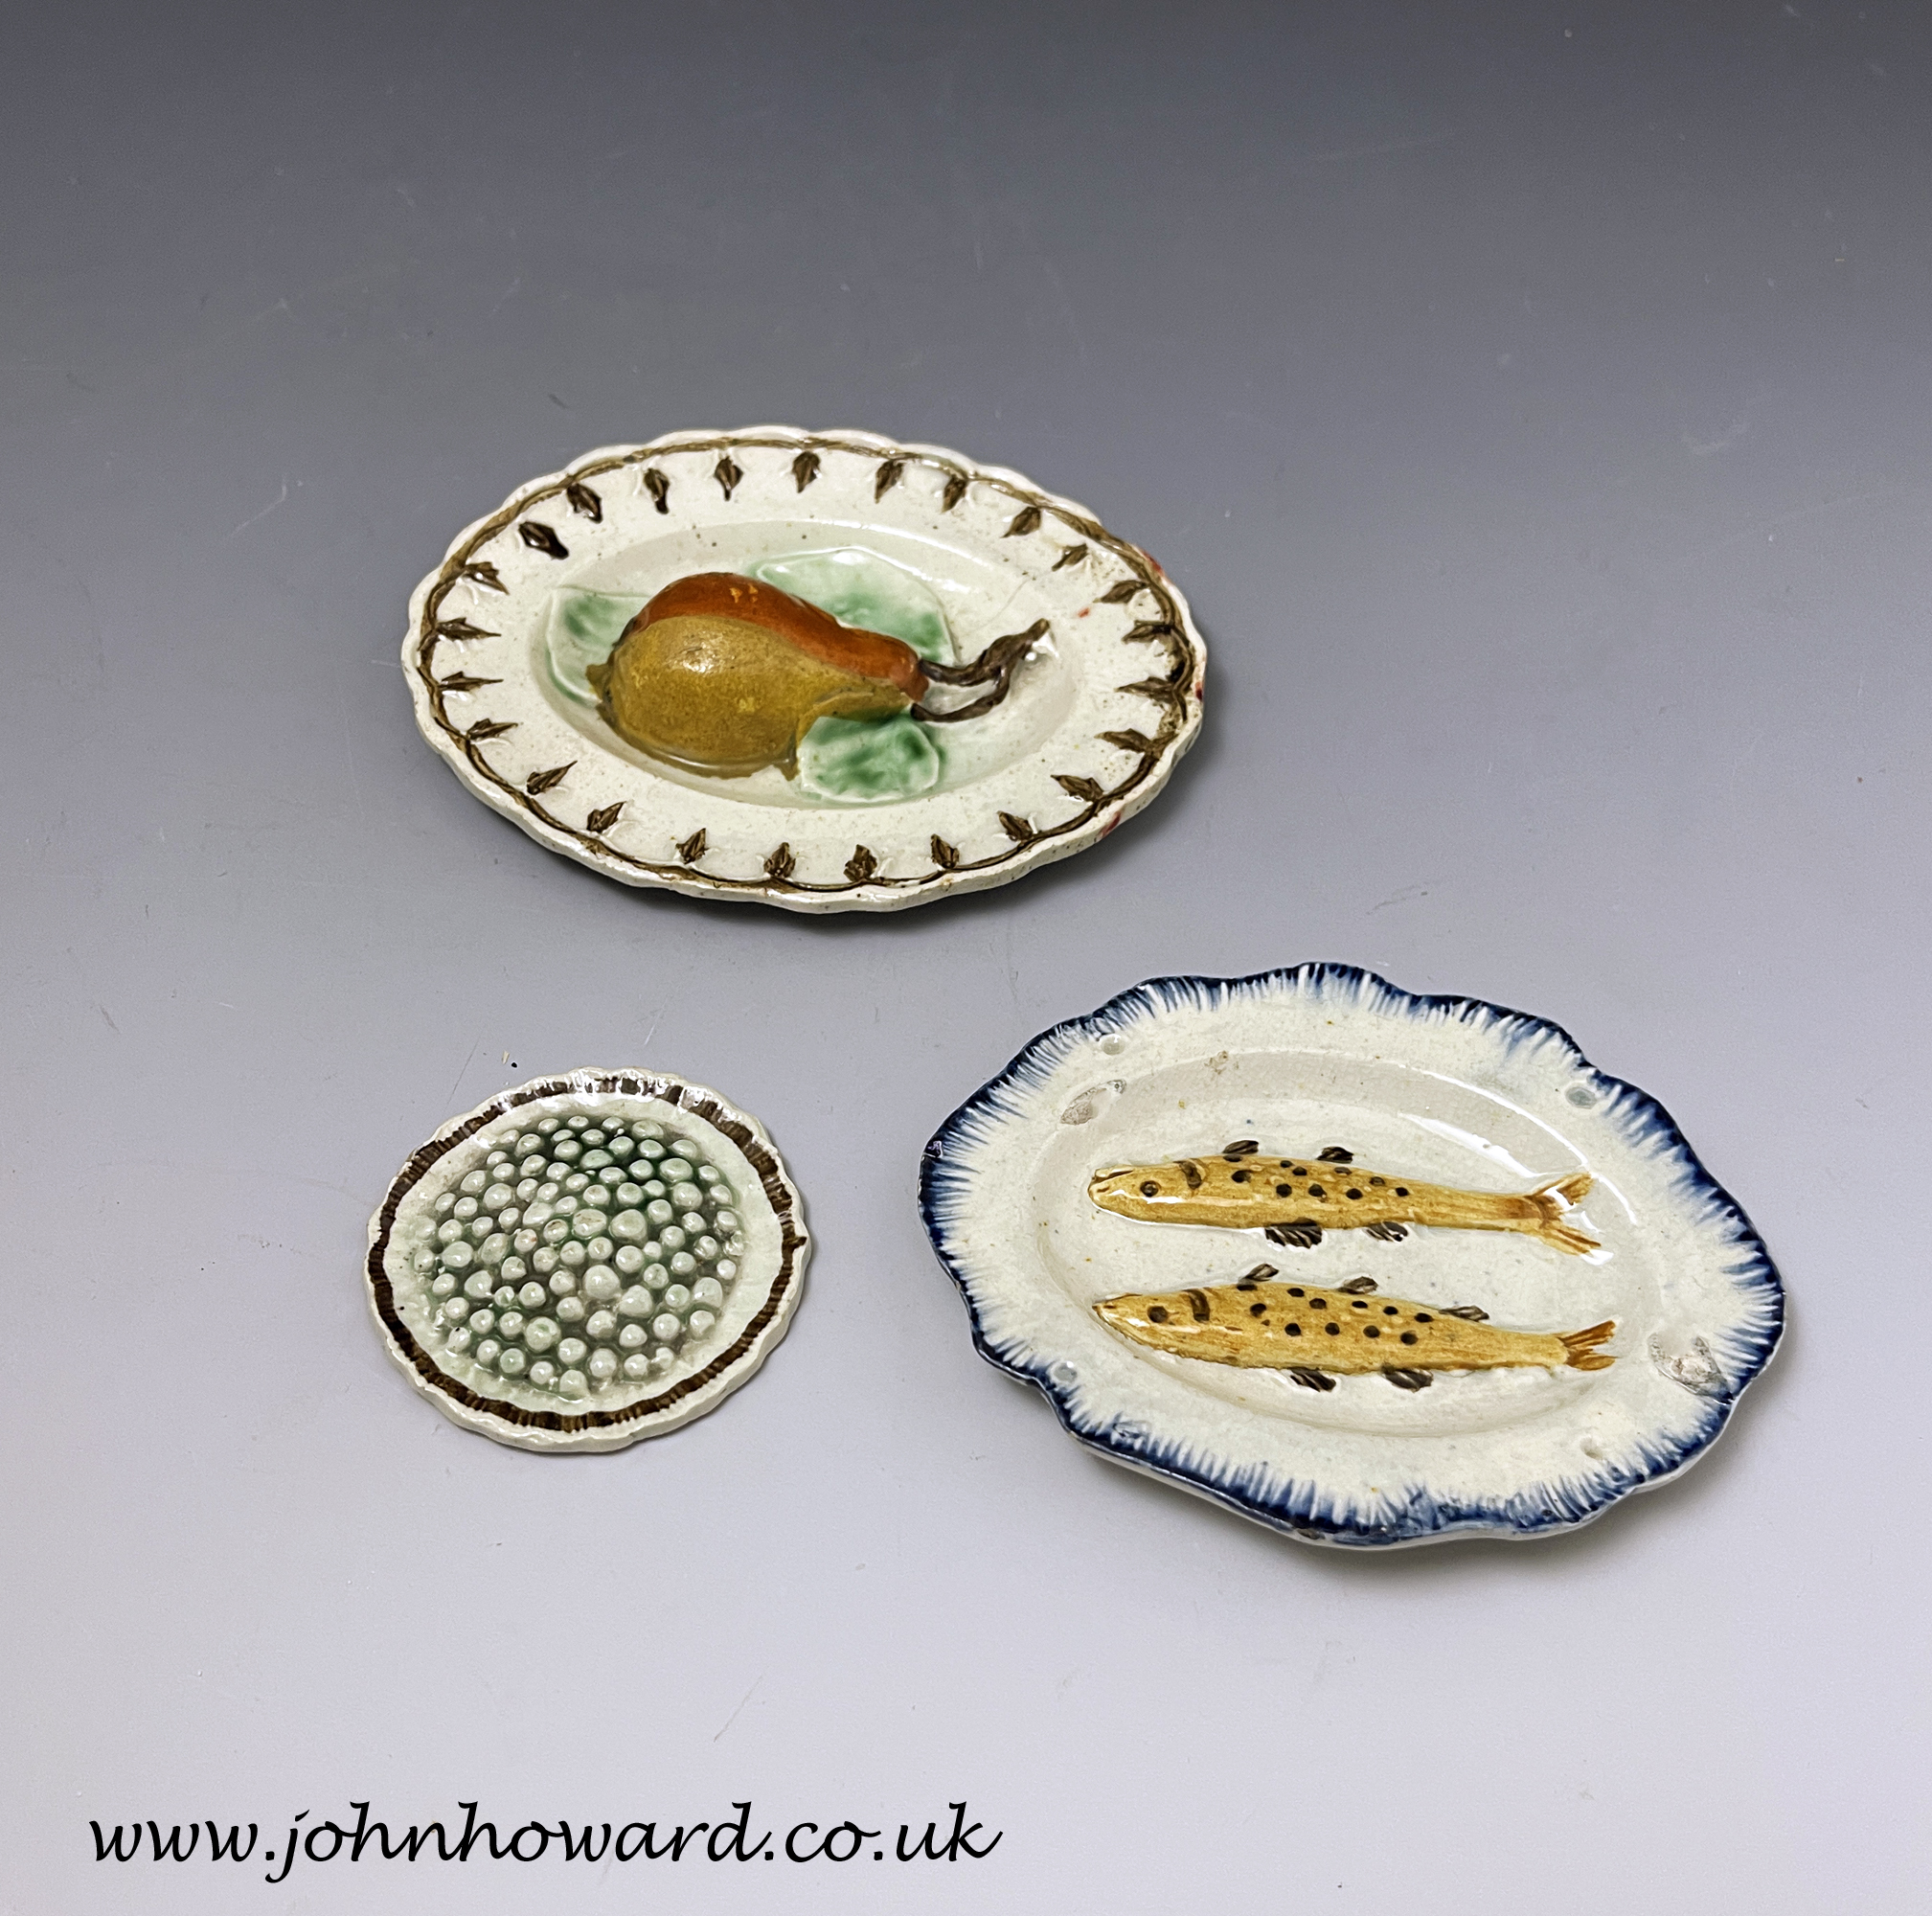 Collection of 3 pearlware pottery nursery dishes with fish, fruit and peas  from 1810 England - John Howard